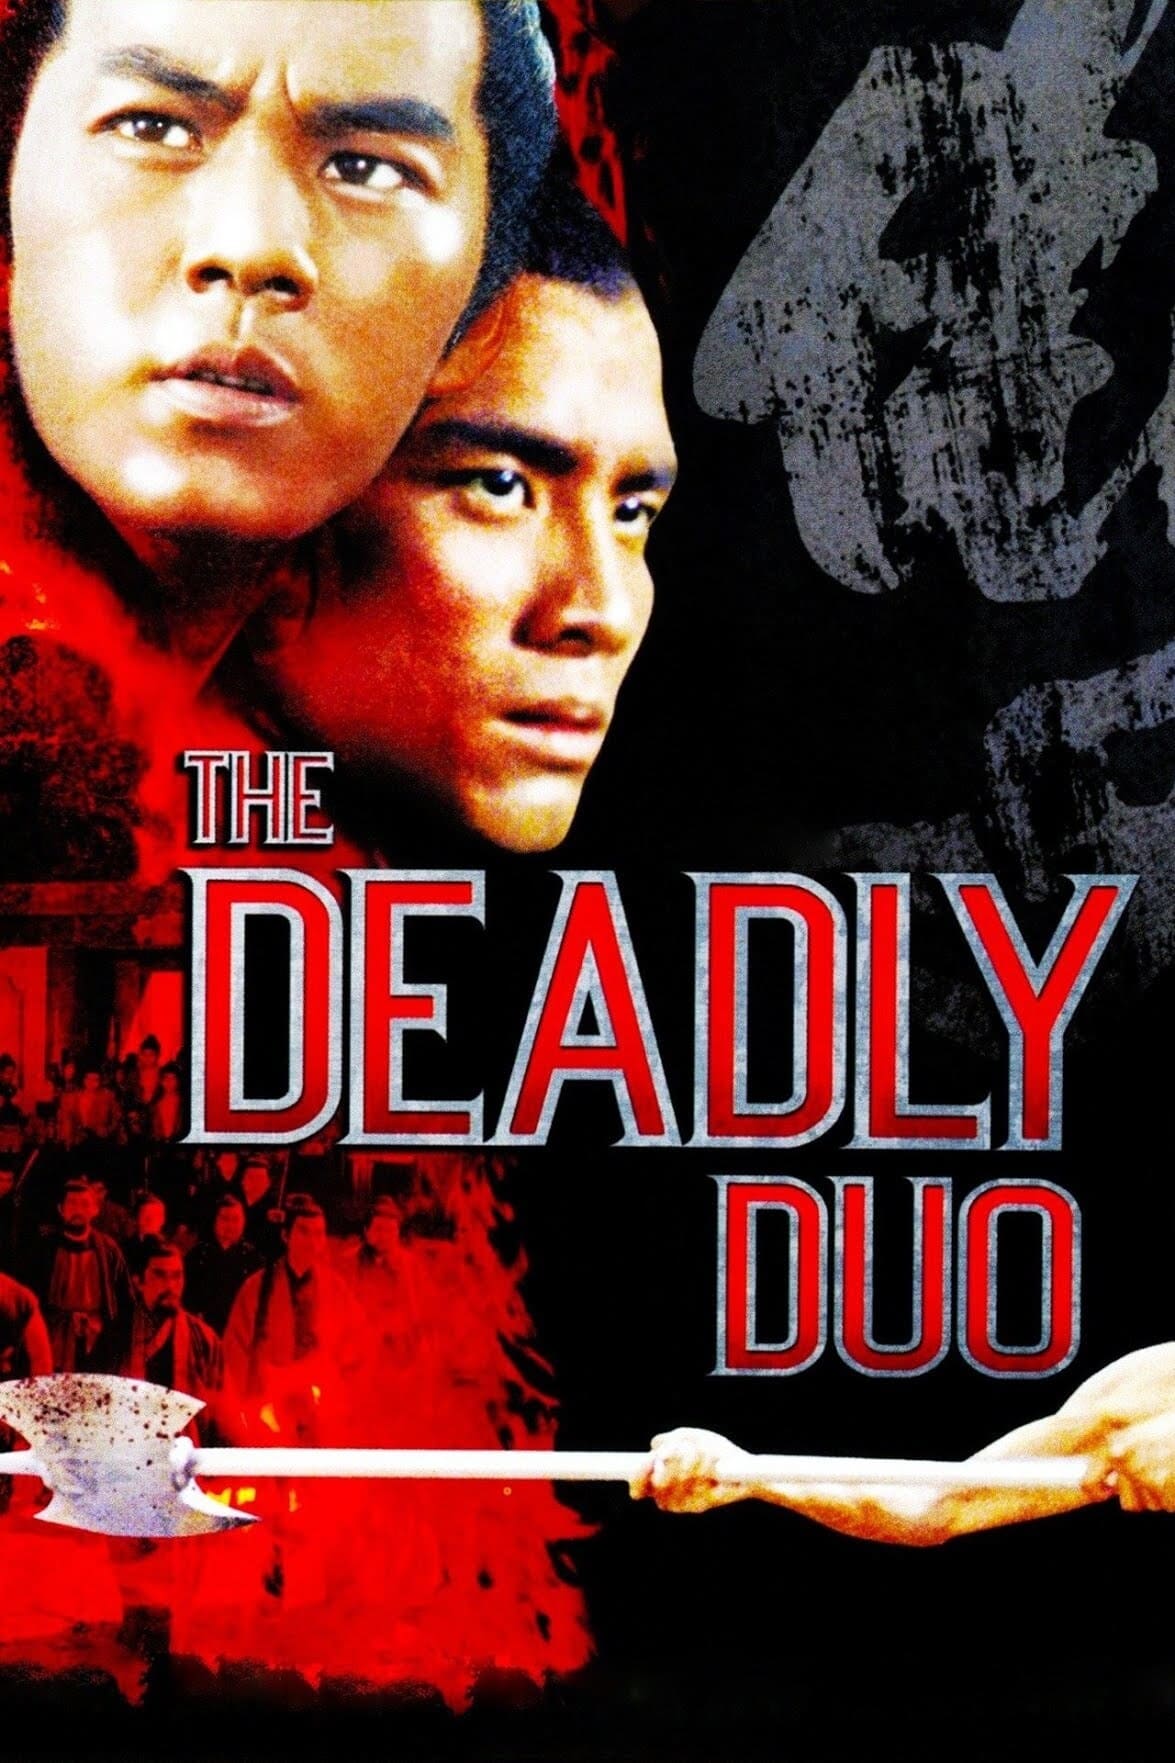 The Deadly Duo (1971)